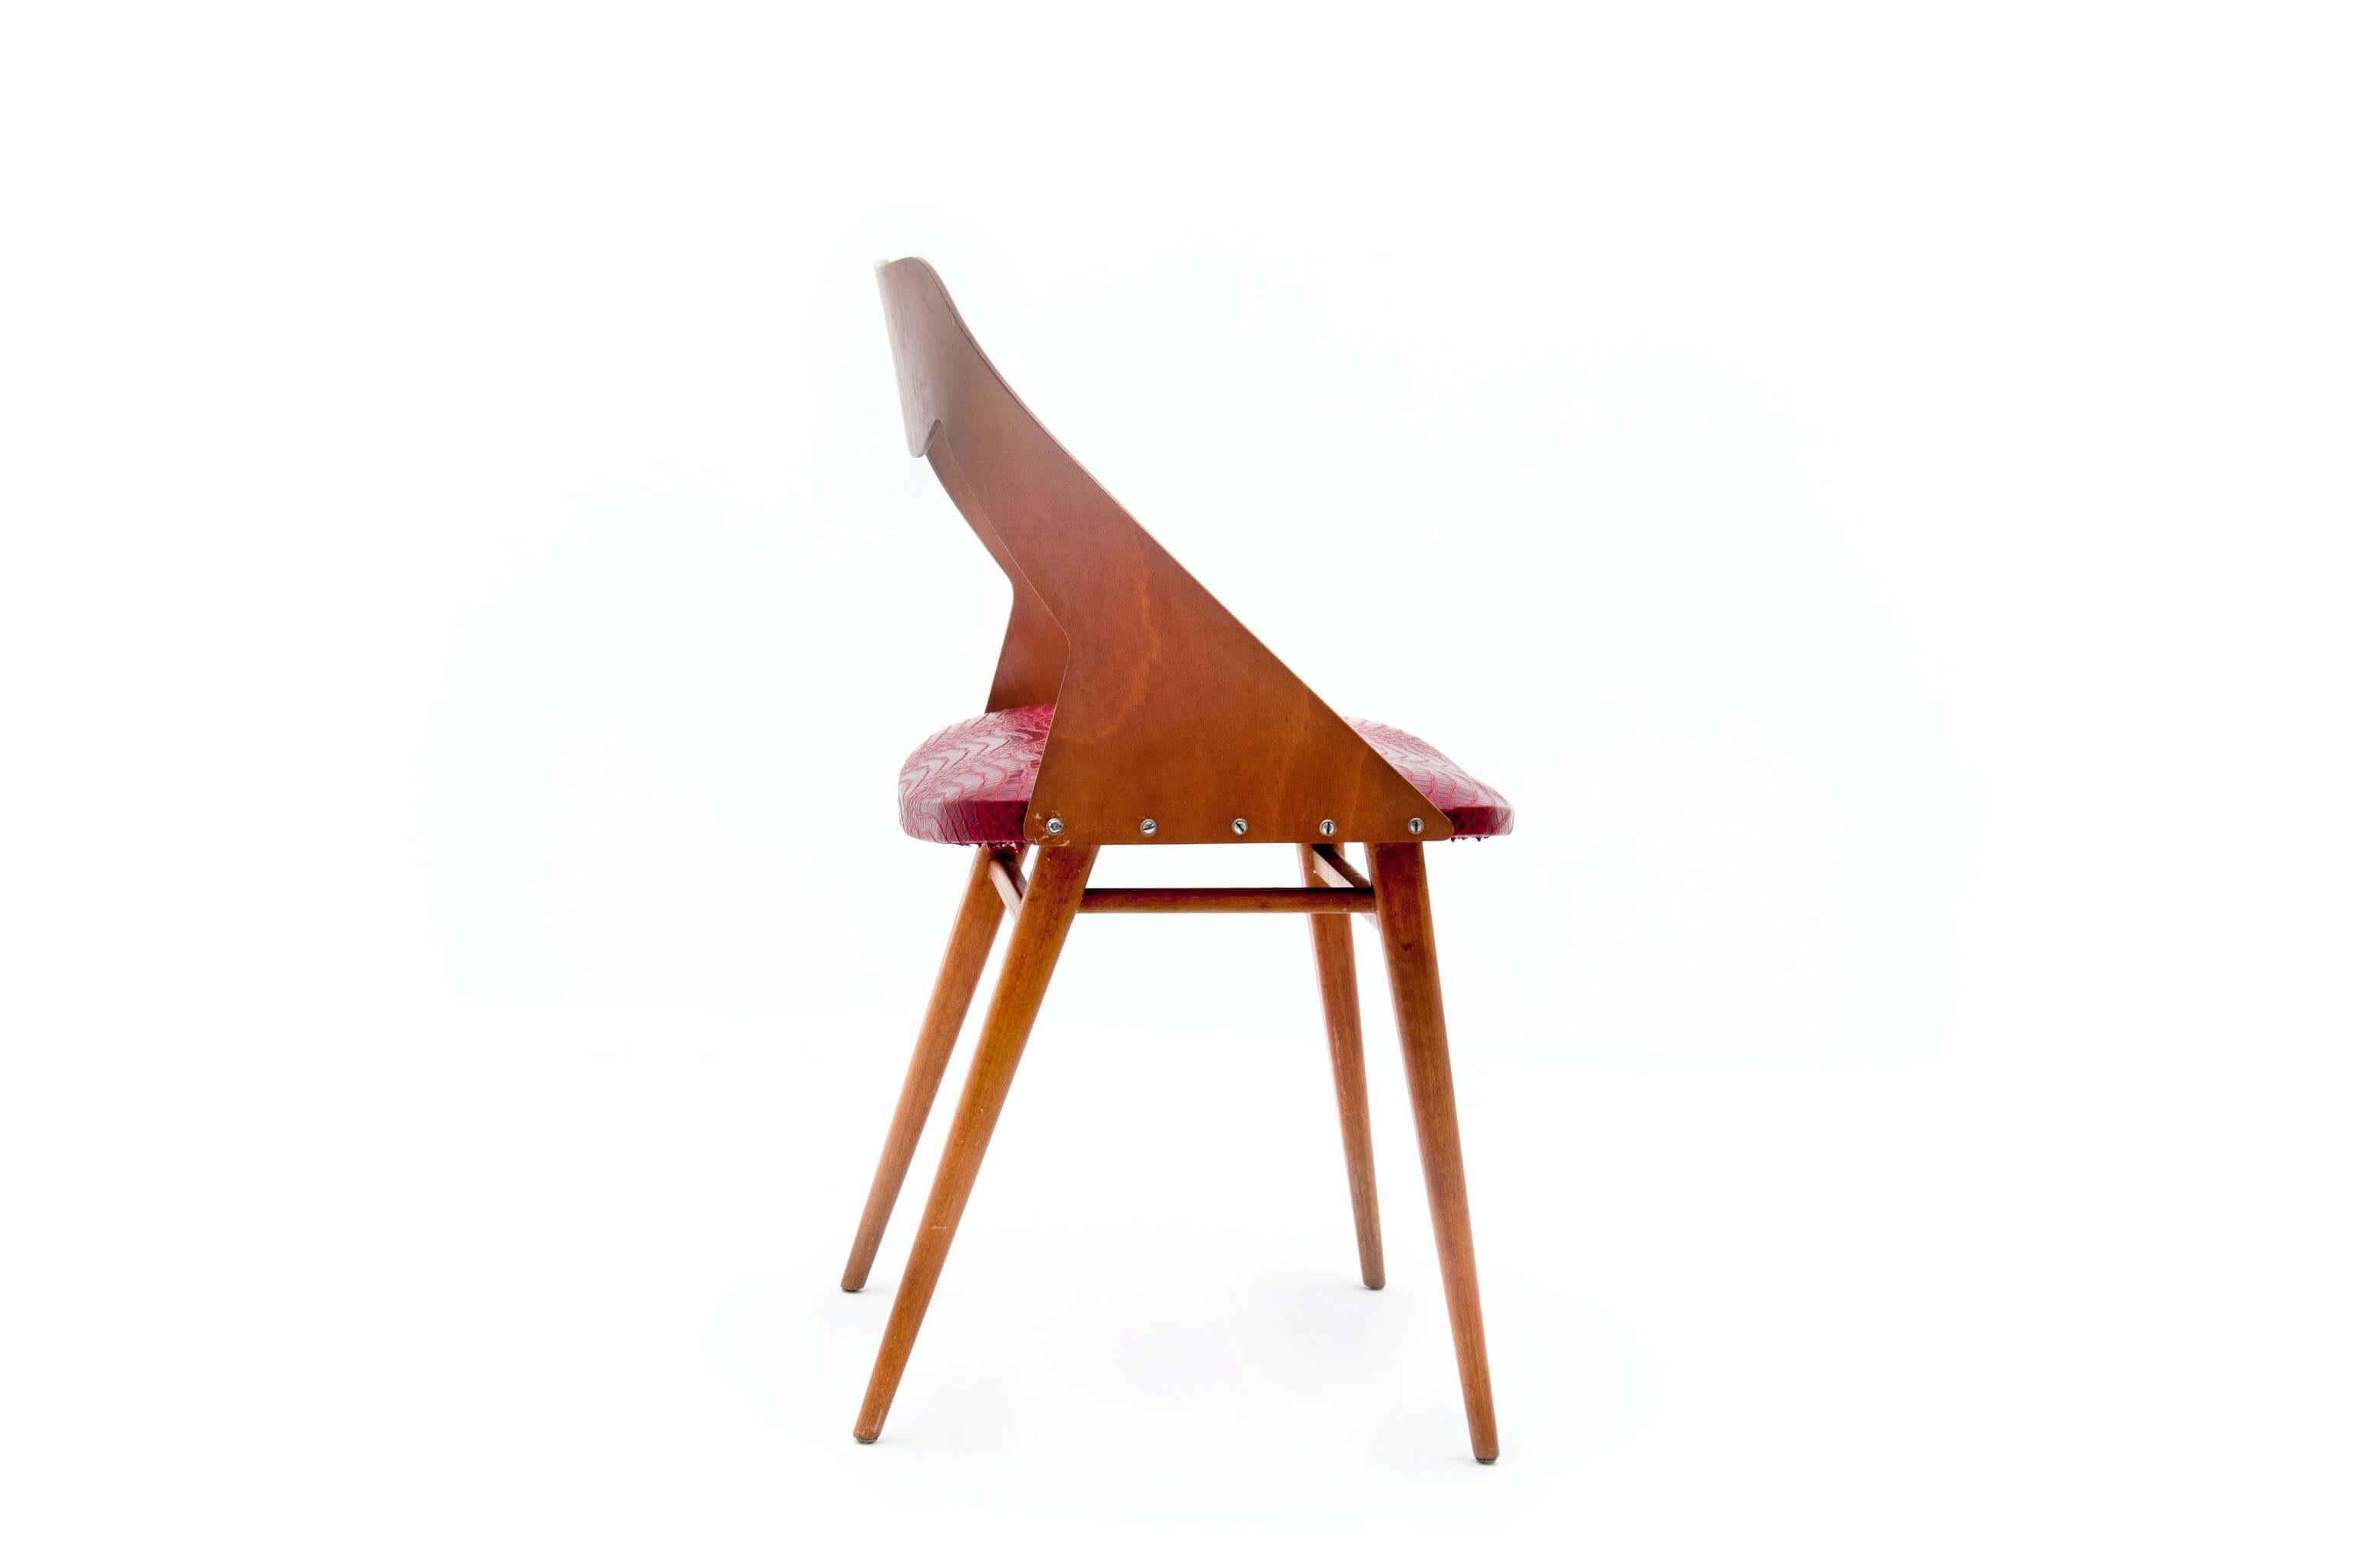 Mid-Century Modern Chair by Paolozzi, in Varnish Brown Wood, and Red Croco Vynil, Italy, 1960